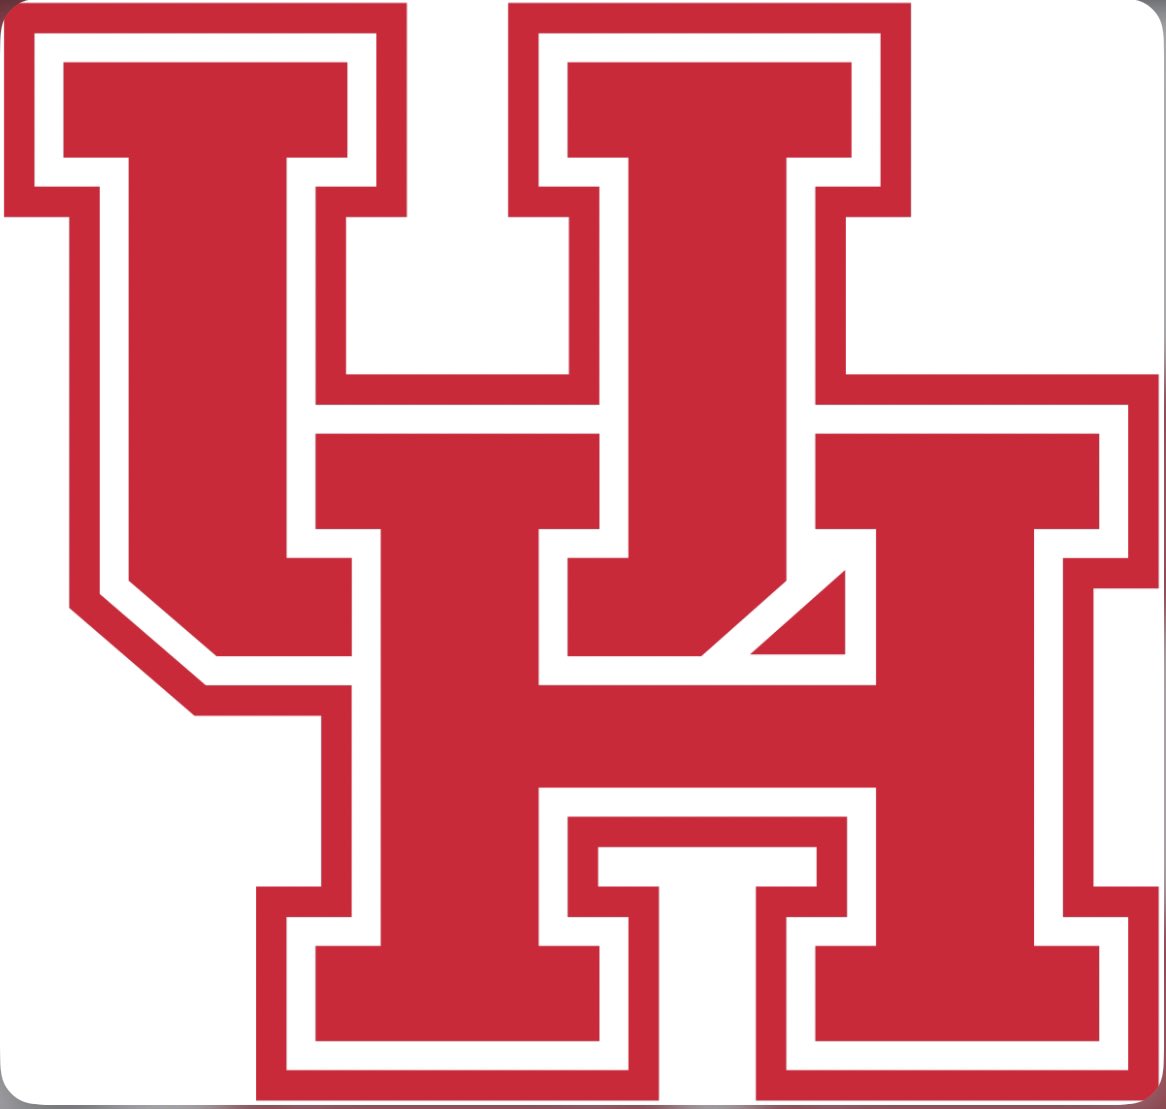 I am blessed to have received an offer from the University of Houston ❗️❗️❗️ #AGTG🙏🏾 @rajesh_murti @Emannaghavi @a_scouts_dream @CoachHart_CC @CCHSfootbal @coachswift64 @UHCougarFB @UHouston